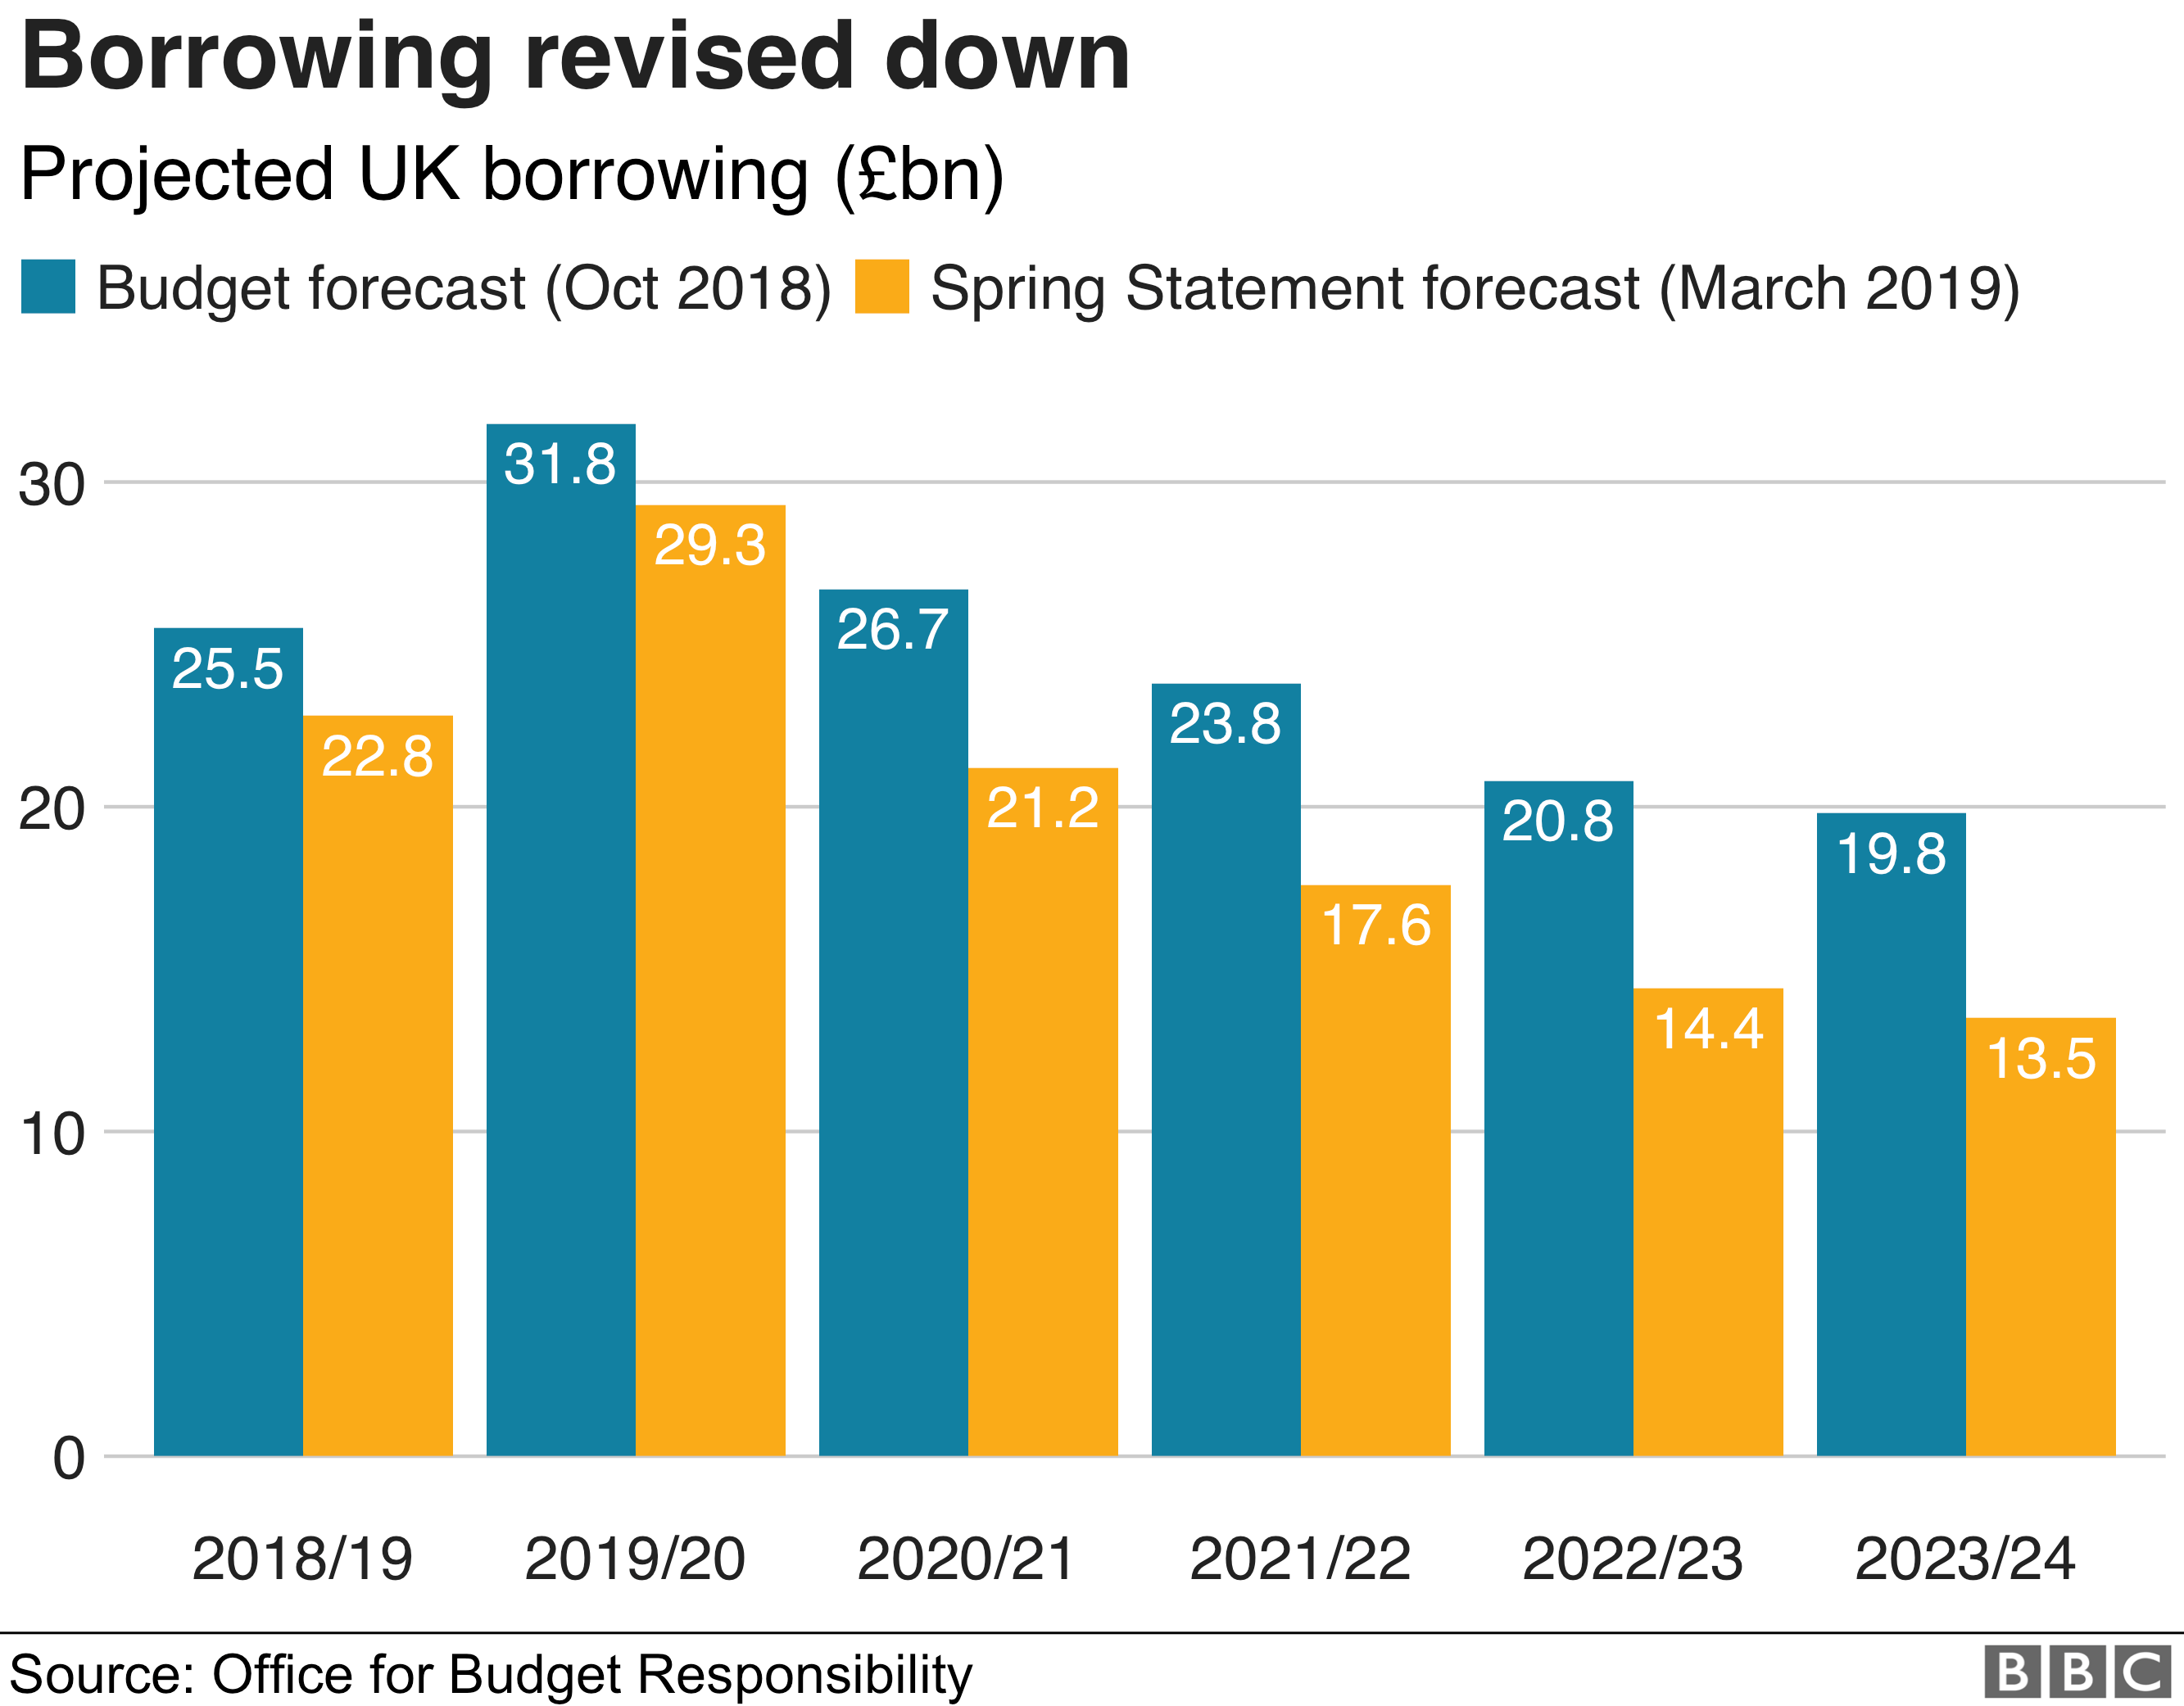 Chart showing UK borrowing projections